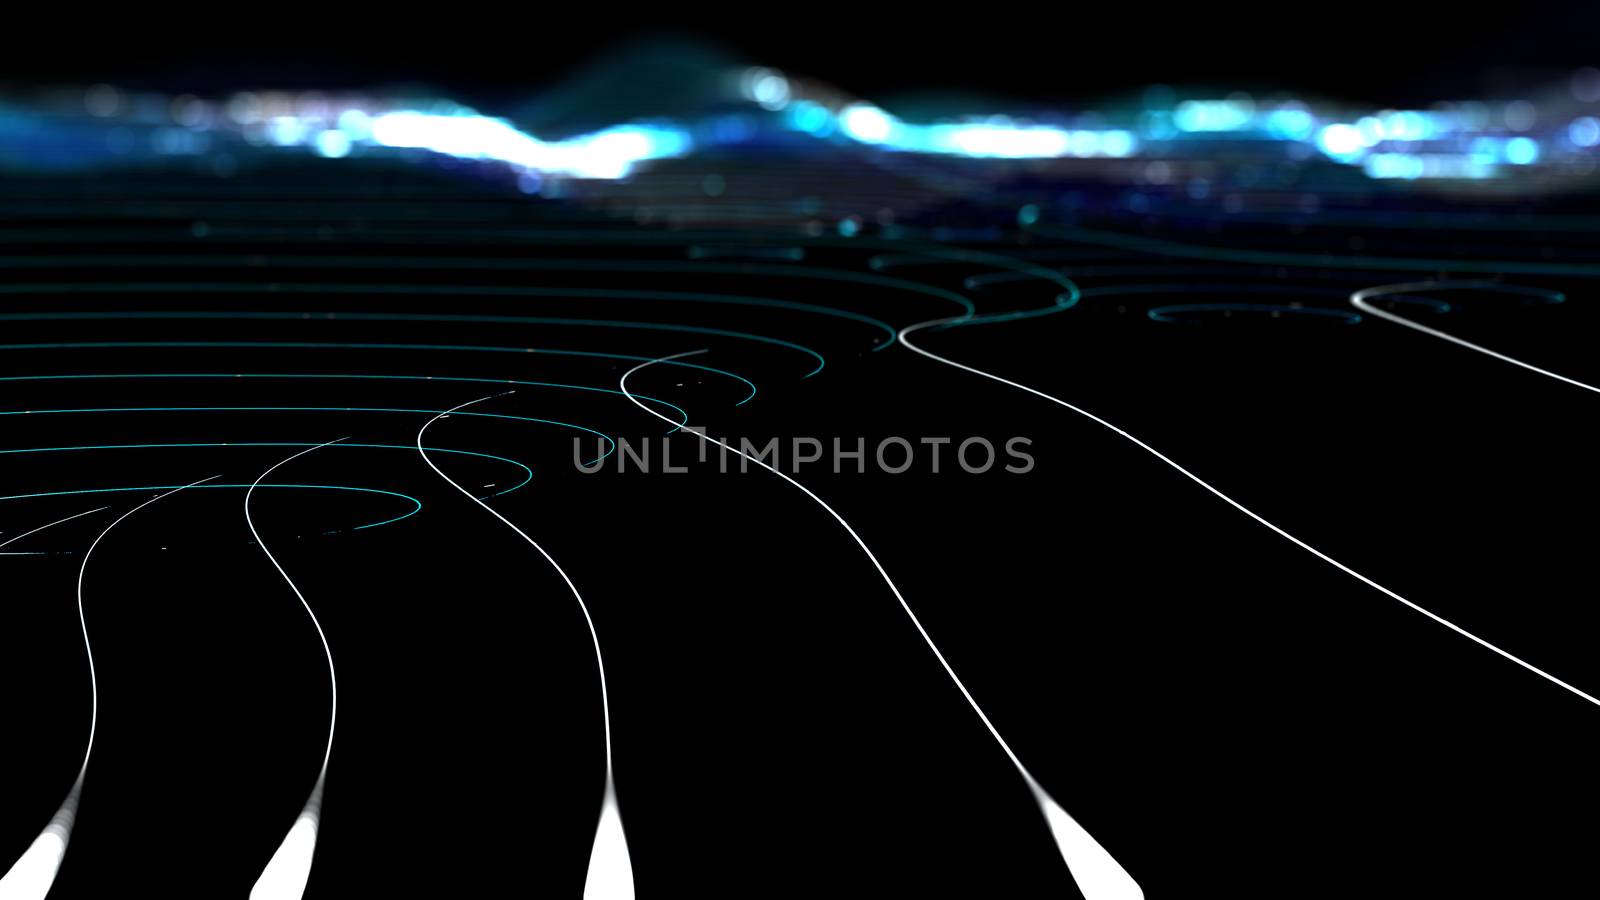 Parallel curves describing several roads. Abstract background. 3D rendering by ytjo